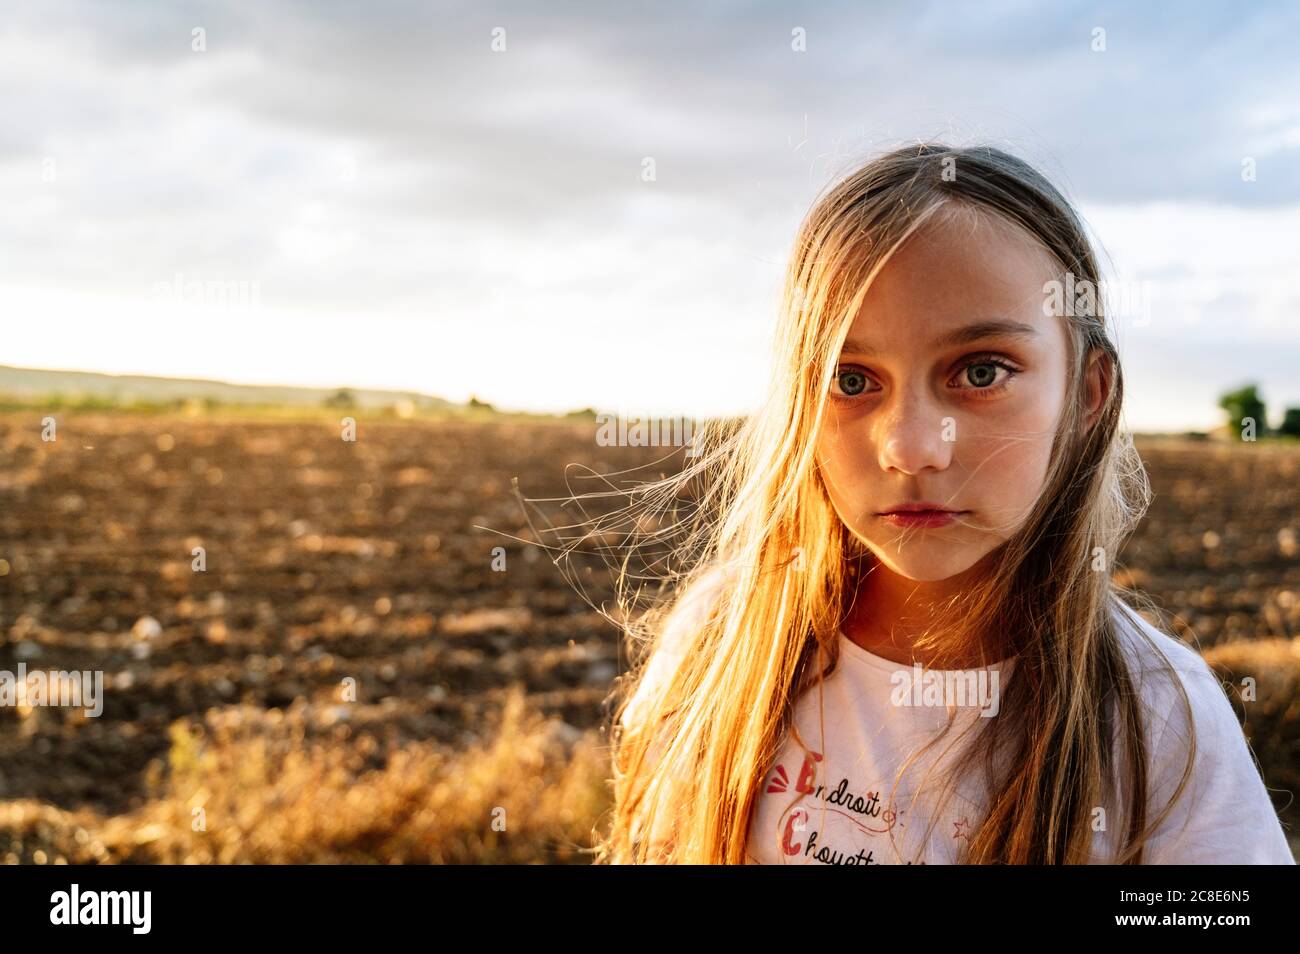 Pre-adolescent girl with long blond hair standing against sky during sunset Stock Photo